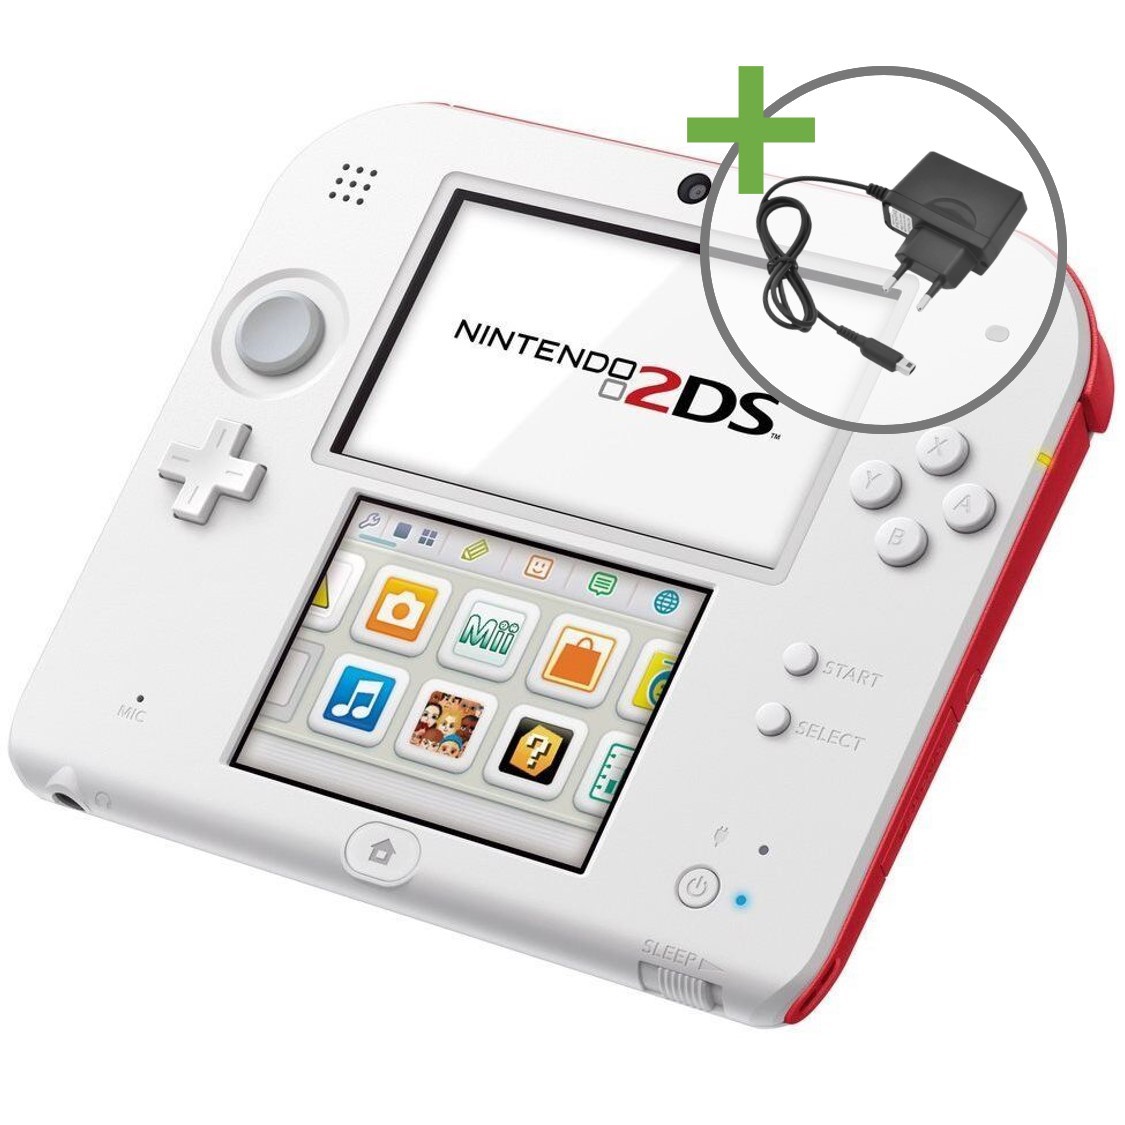 Nintendo 2DS - White/Red [Complete] - Nintendo 3DS Hardware - 2